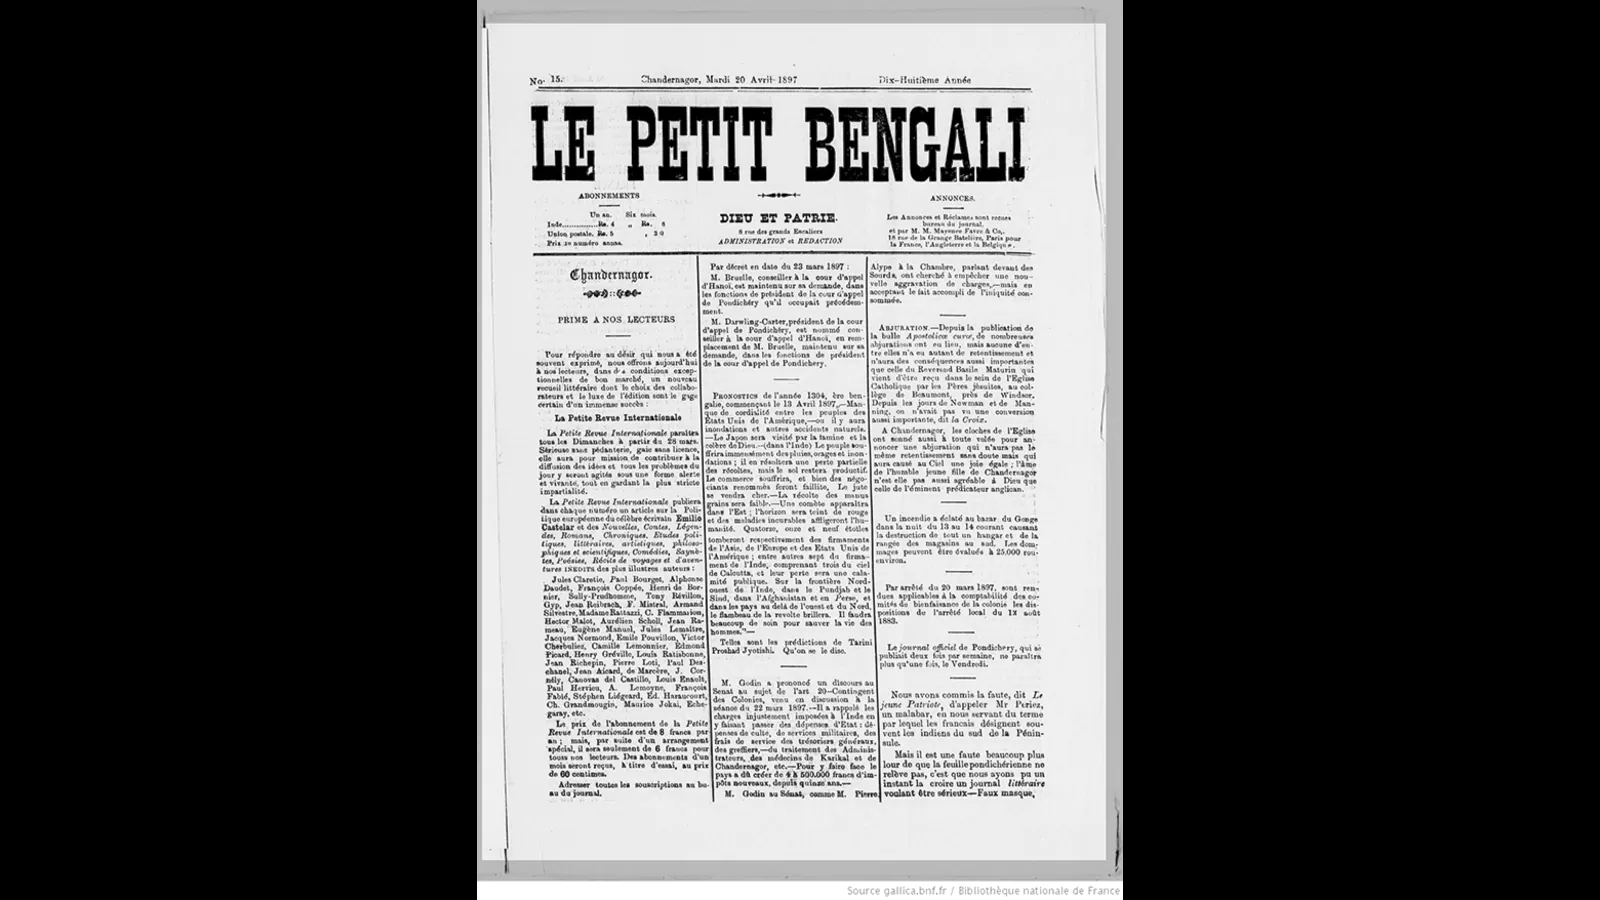 Le Petit Bengali: A newspaper that offers a Franc look at the past